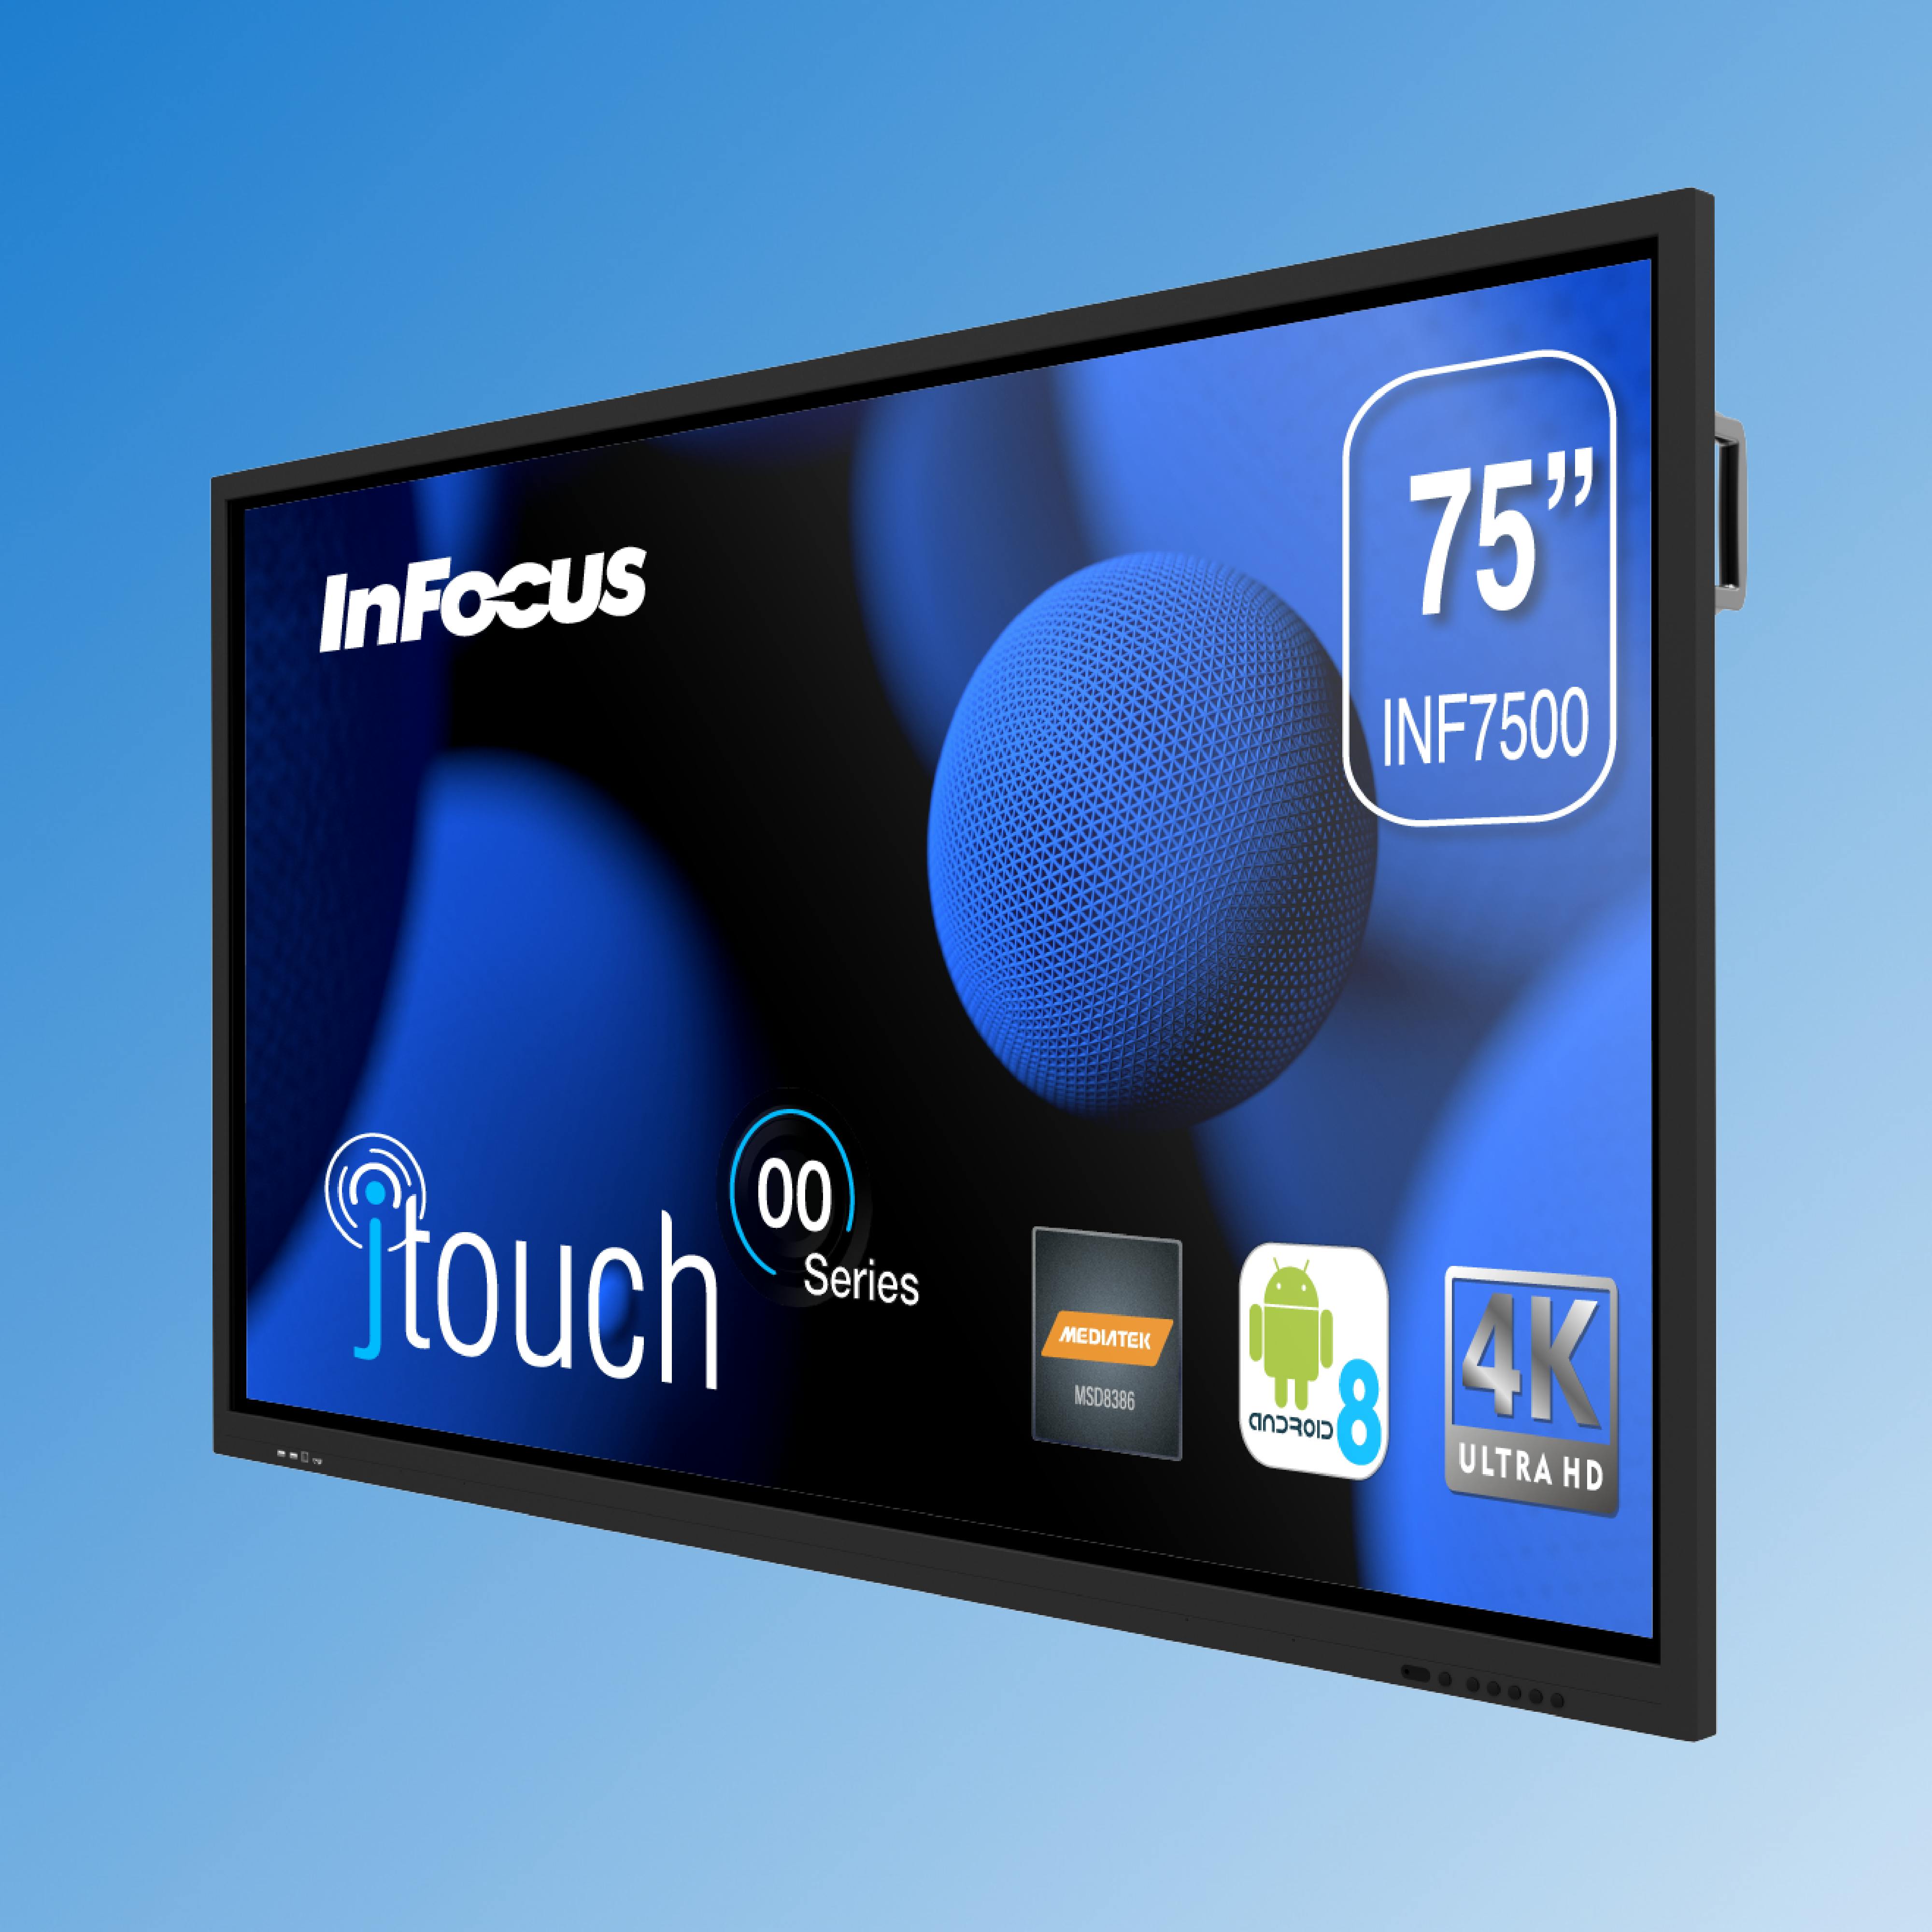 JTouch Series 00 - INF7500